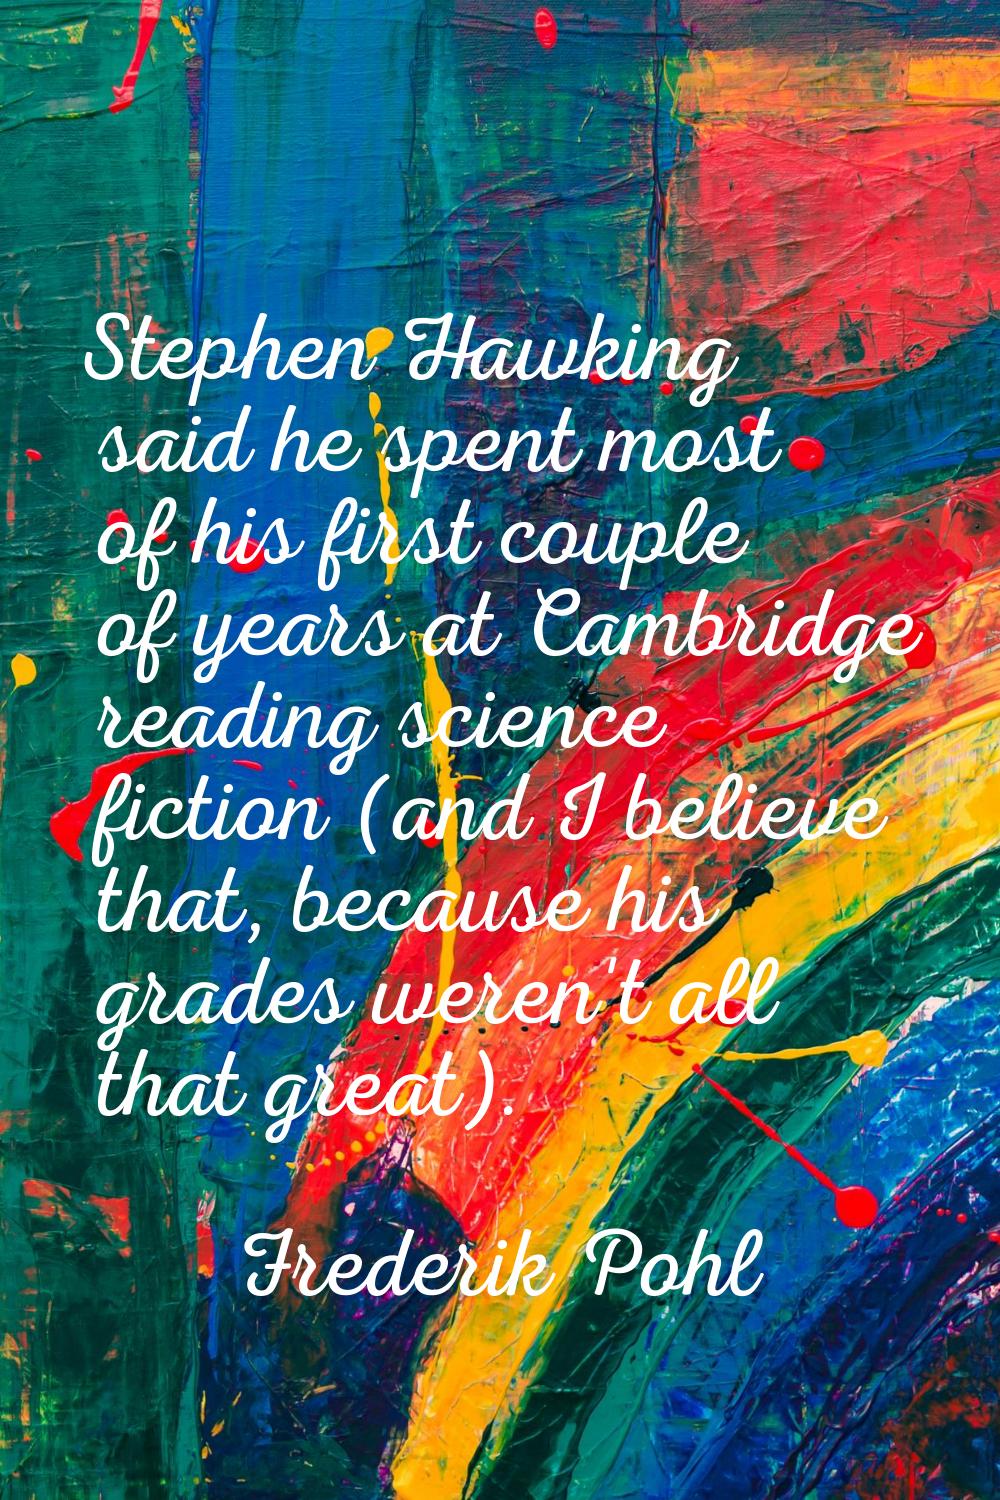 Stephen Hawking said he spent most of his first couple of years at Cambridge reading science fictio